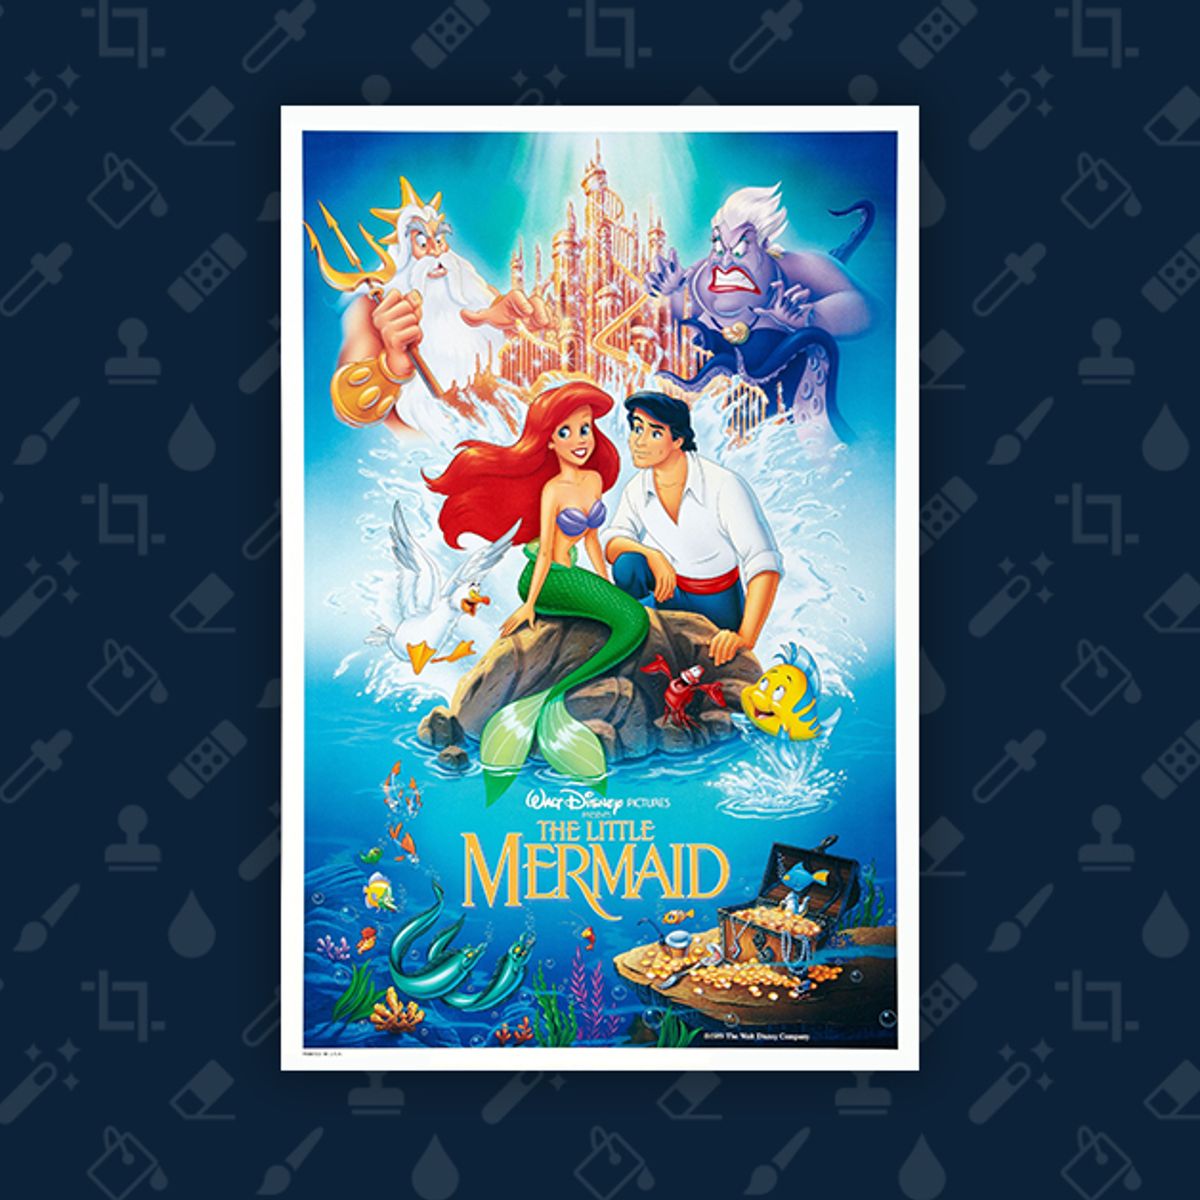 Was a Phallus Purposely Added to the Artwork for 'The Little Mermaid' VHS  Cover? | Snopes.com